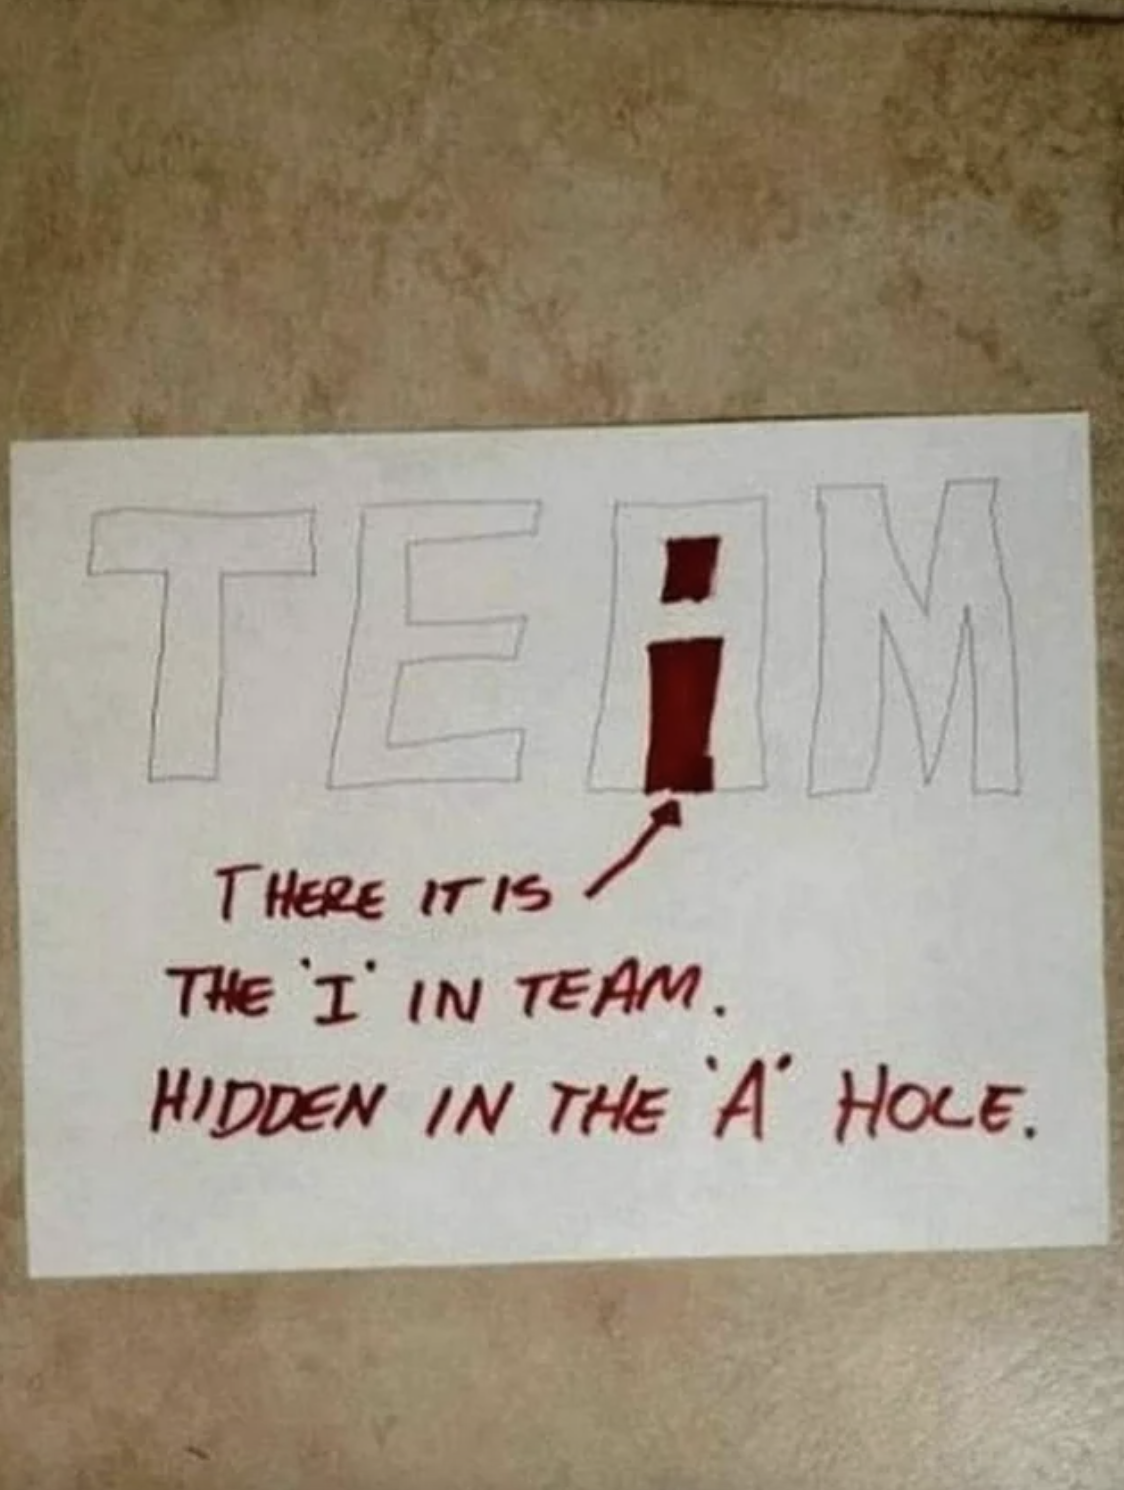 &quot;Hidden in the &#x27;A&#x27; hole.&quot;